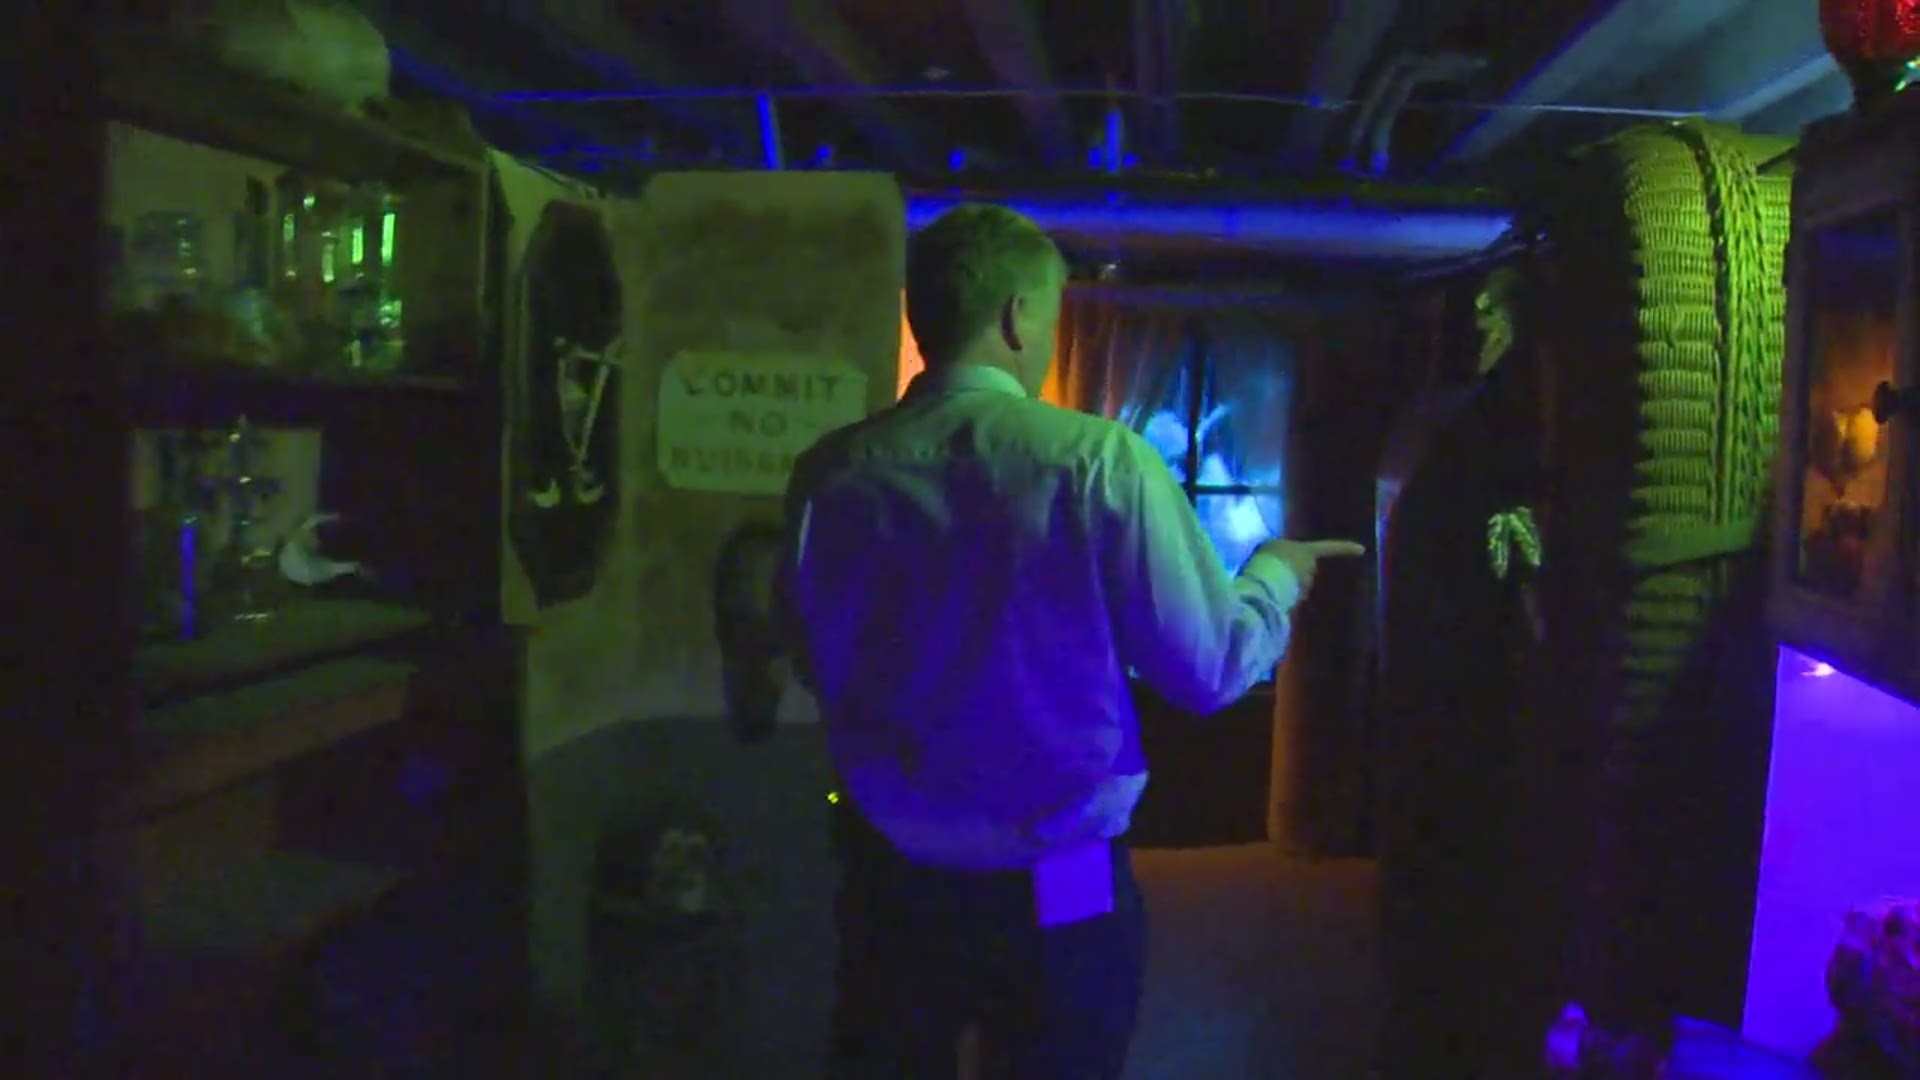 The Oregon School for the Deaf Nightmare Factory in Salem draws thousands for big scares.